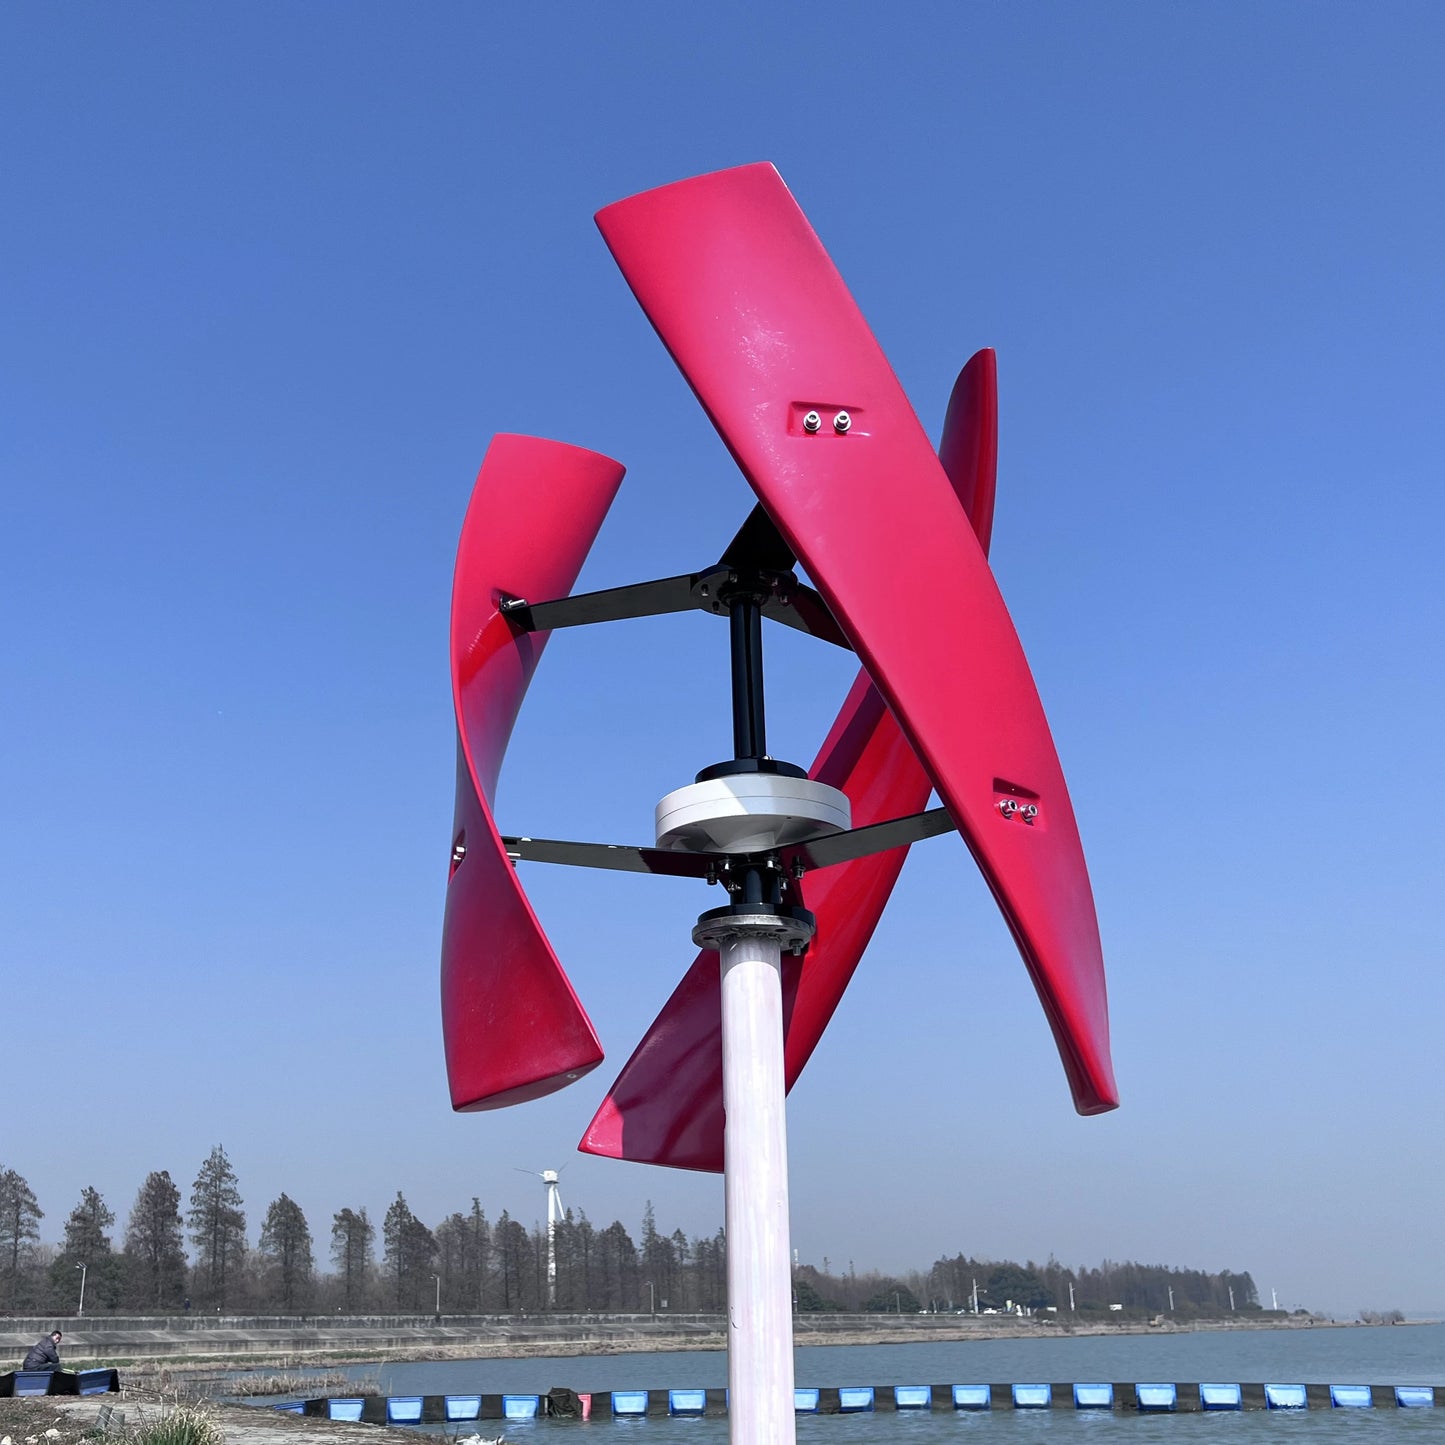 New Arrival Facotry 400W 500W 600W 12V/24V/48V Vertical Axis Wind Turbine Generator MPPT Controller Free Energy For Home Use